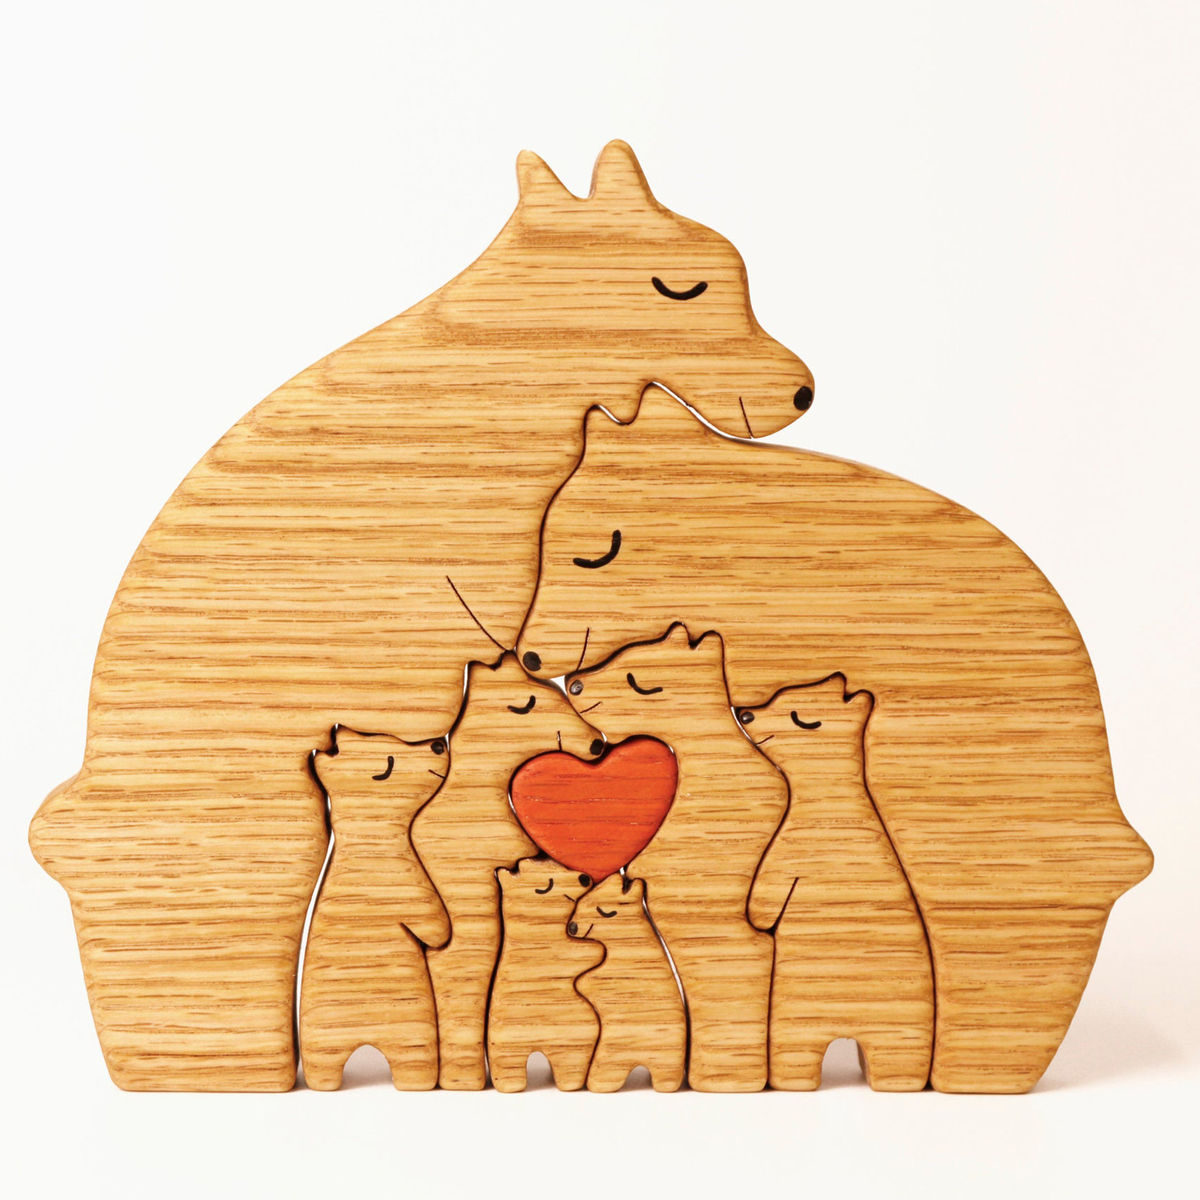 Wooden Bears family puzzle - Up to 6 Kids - Christmas Decor, Family Keepsake Gift, Home Decor_6